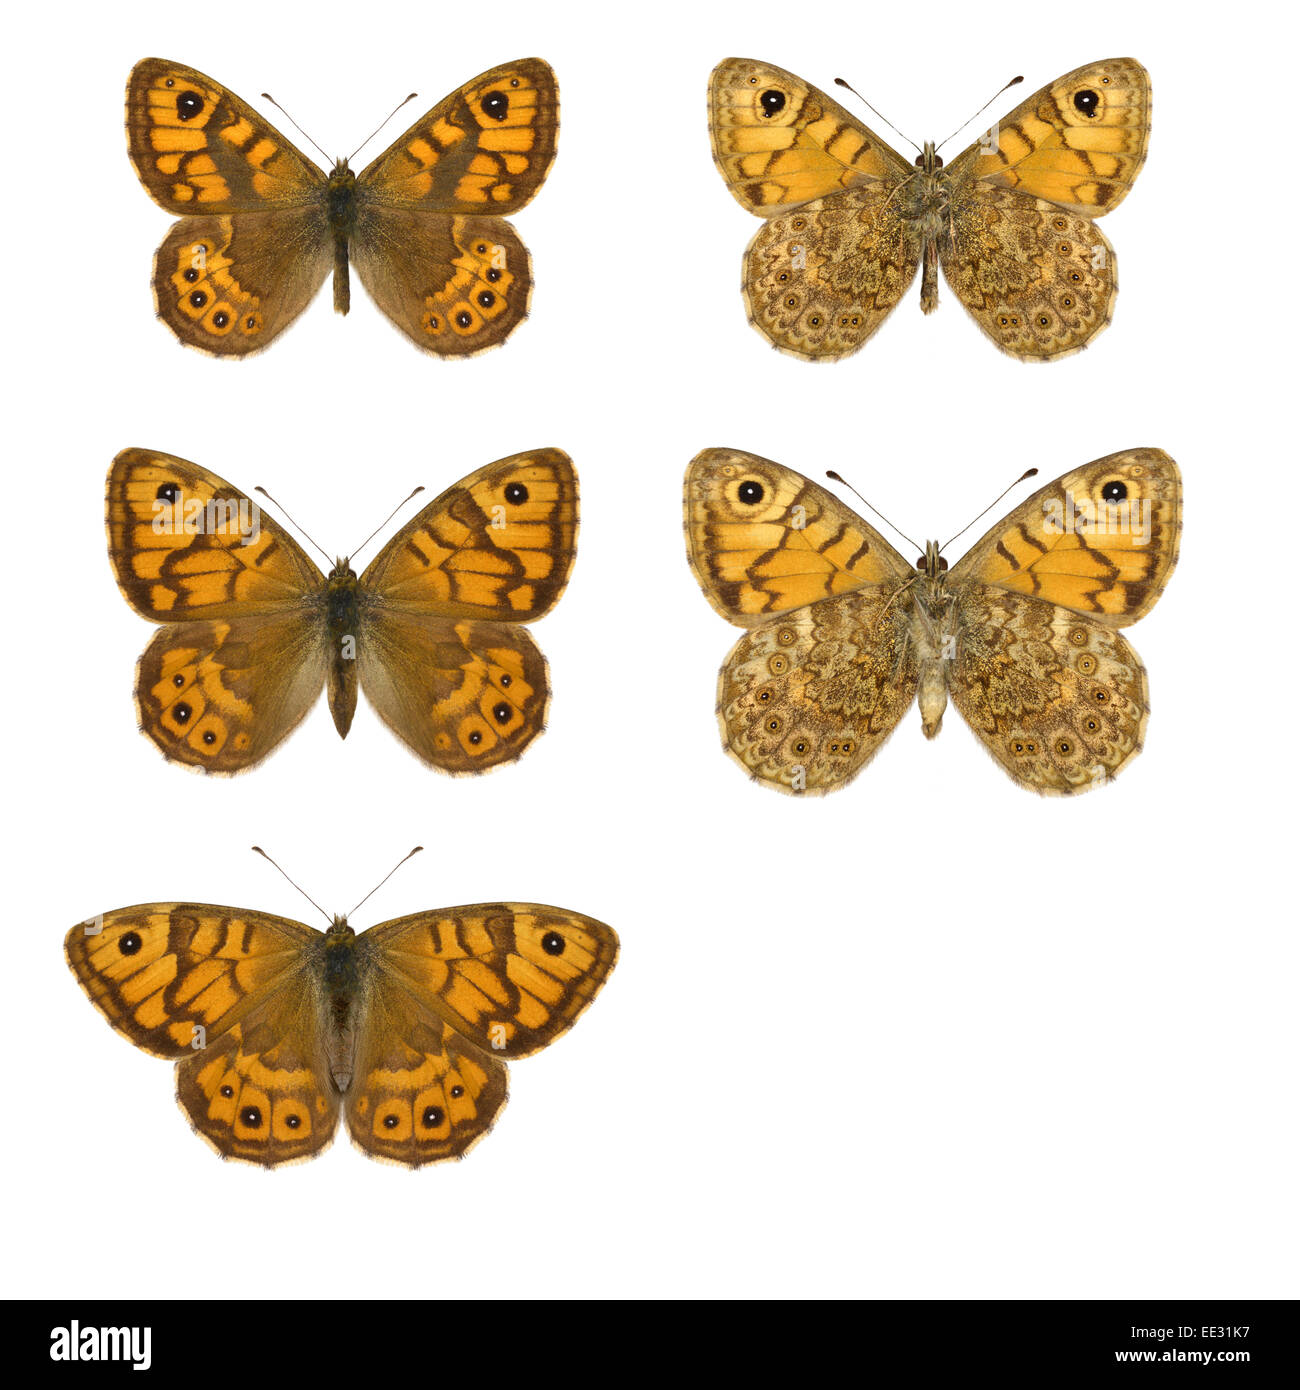 Wall Brown - Lasiommata megera - male (top row) - female (middle row) - female in natural pose (bottom row). Stock Photo